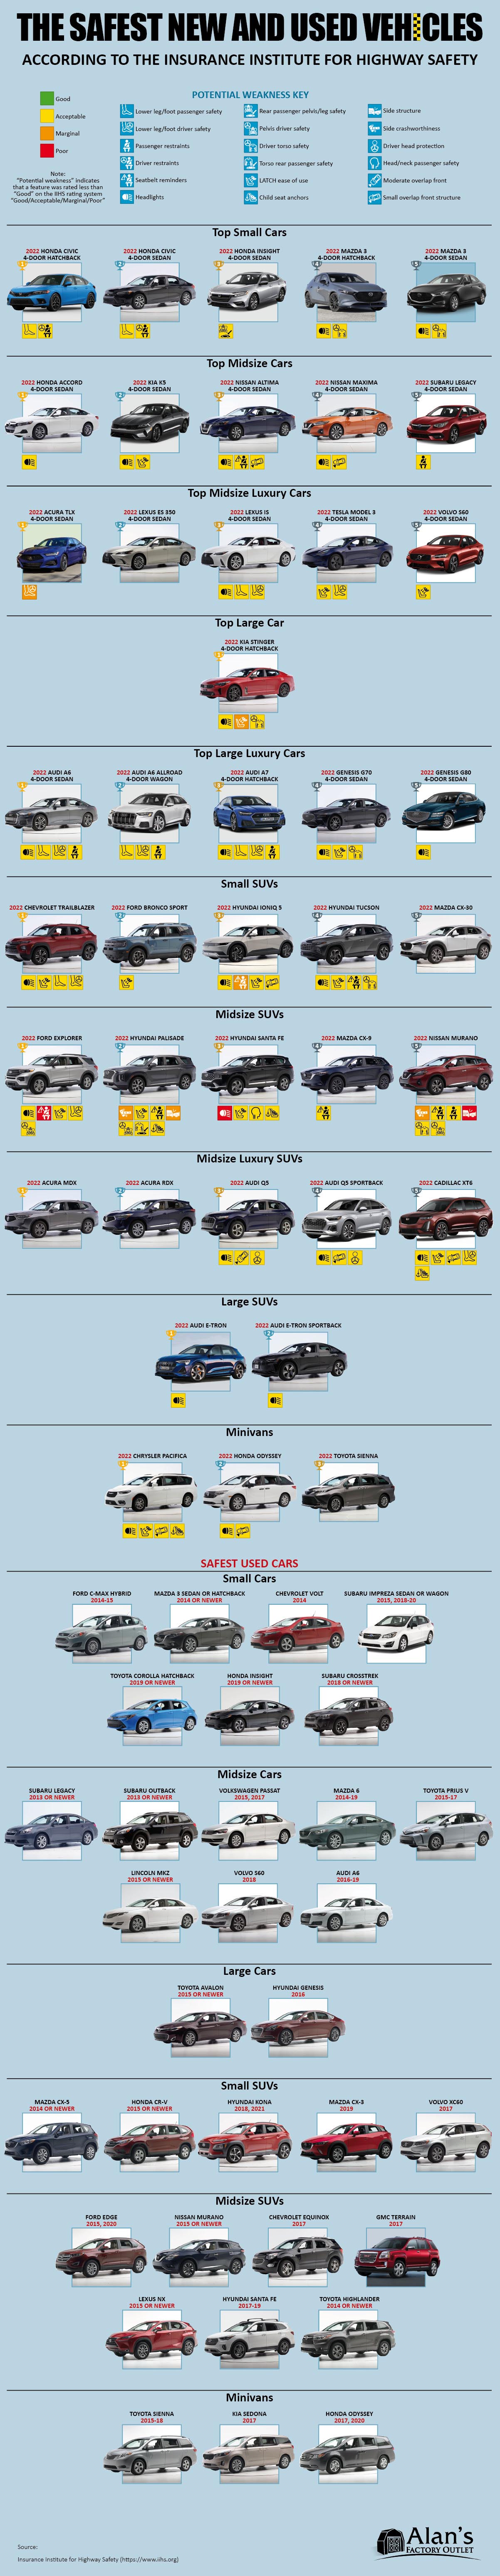 The Safest New and Used Vehicles